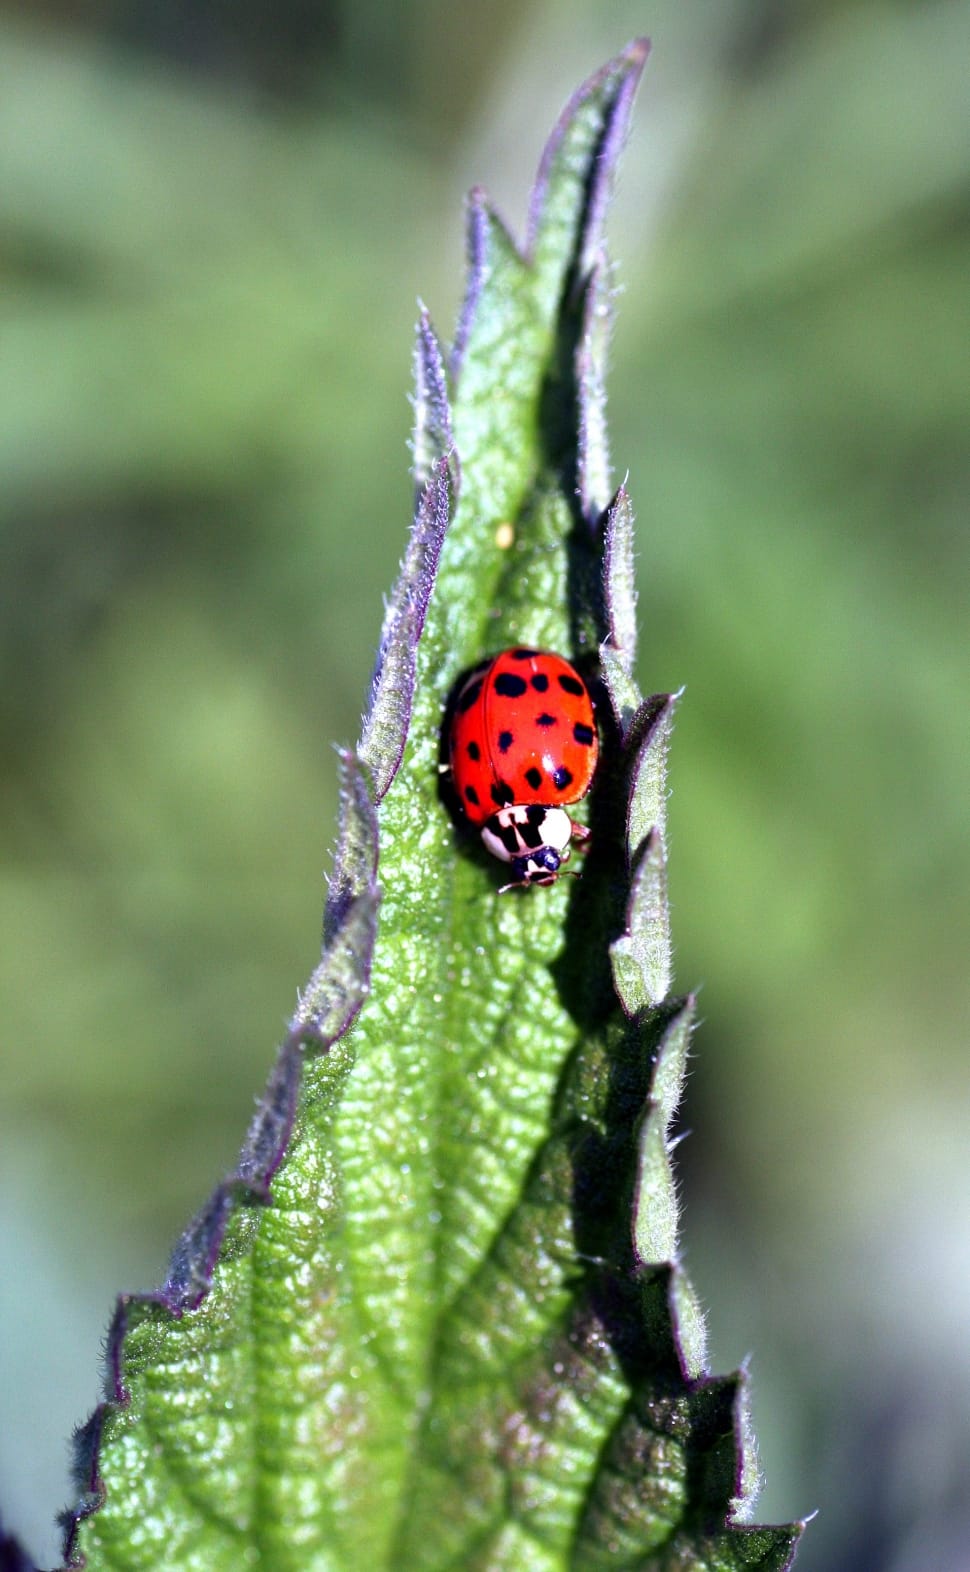 Red, Insect, Ladybug, Nature, Spring, insect, ladybug preview